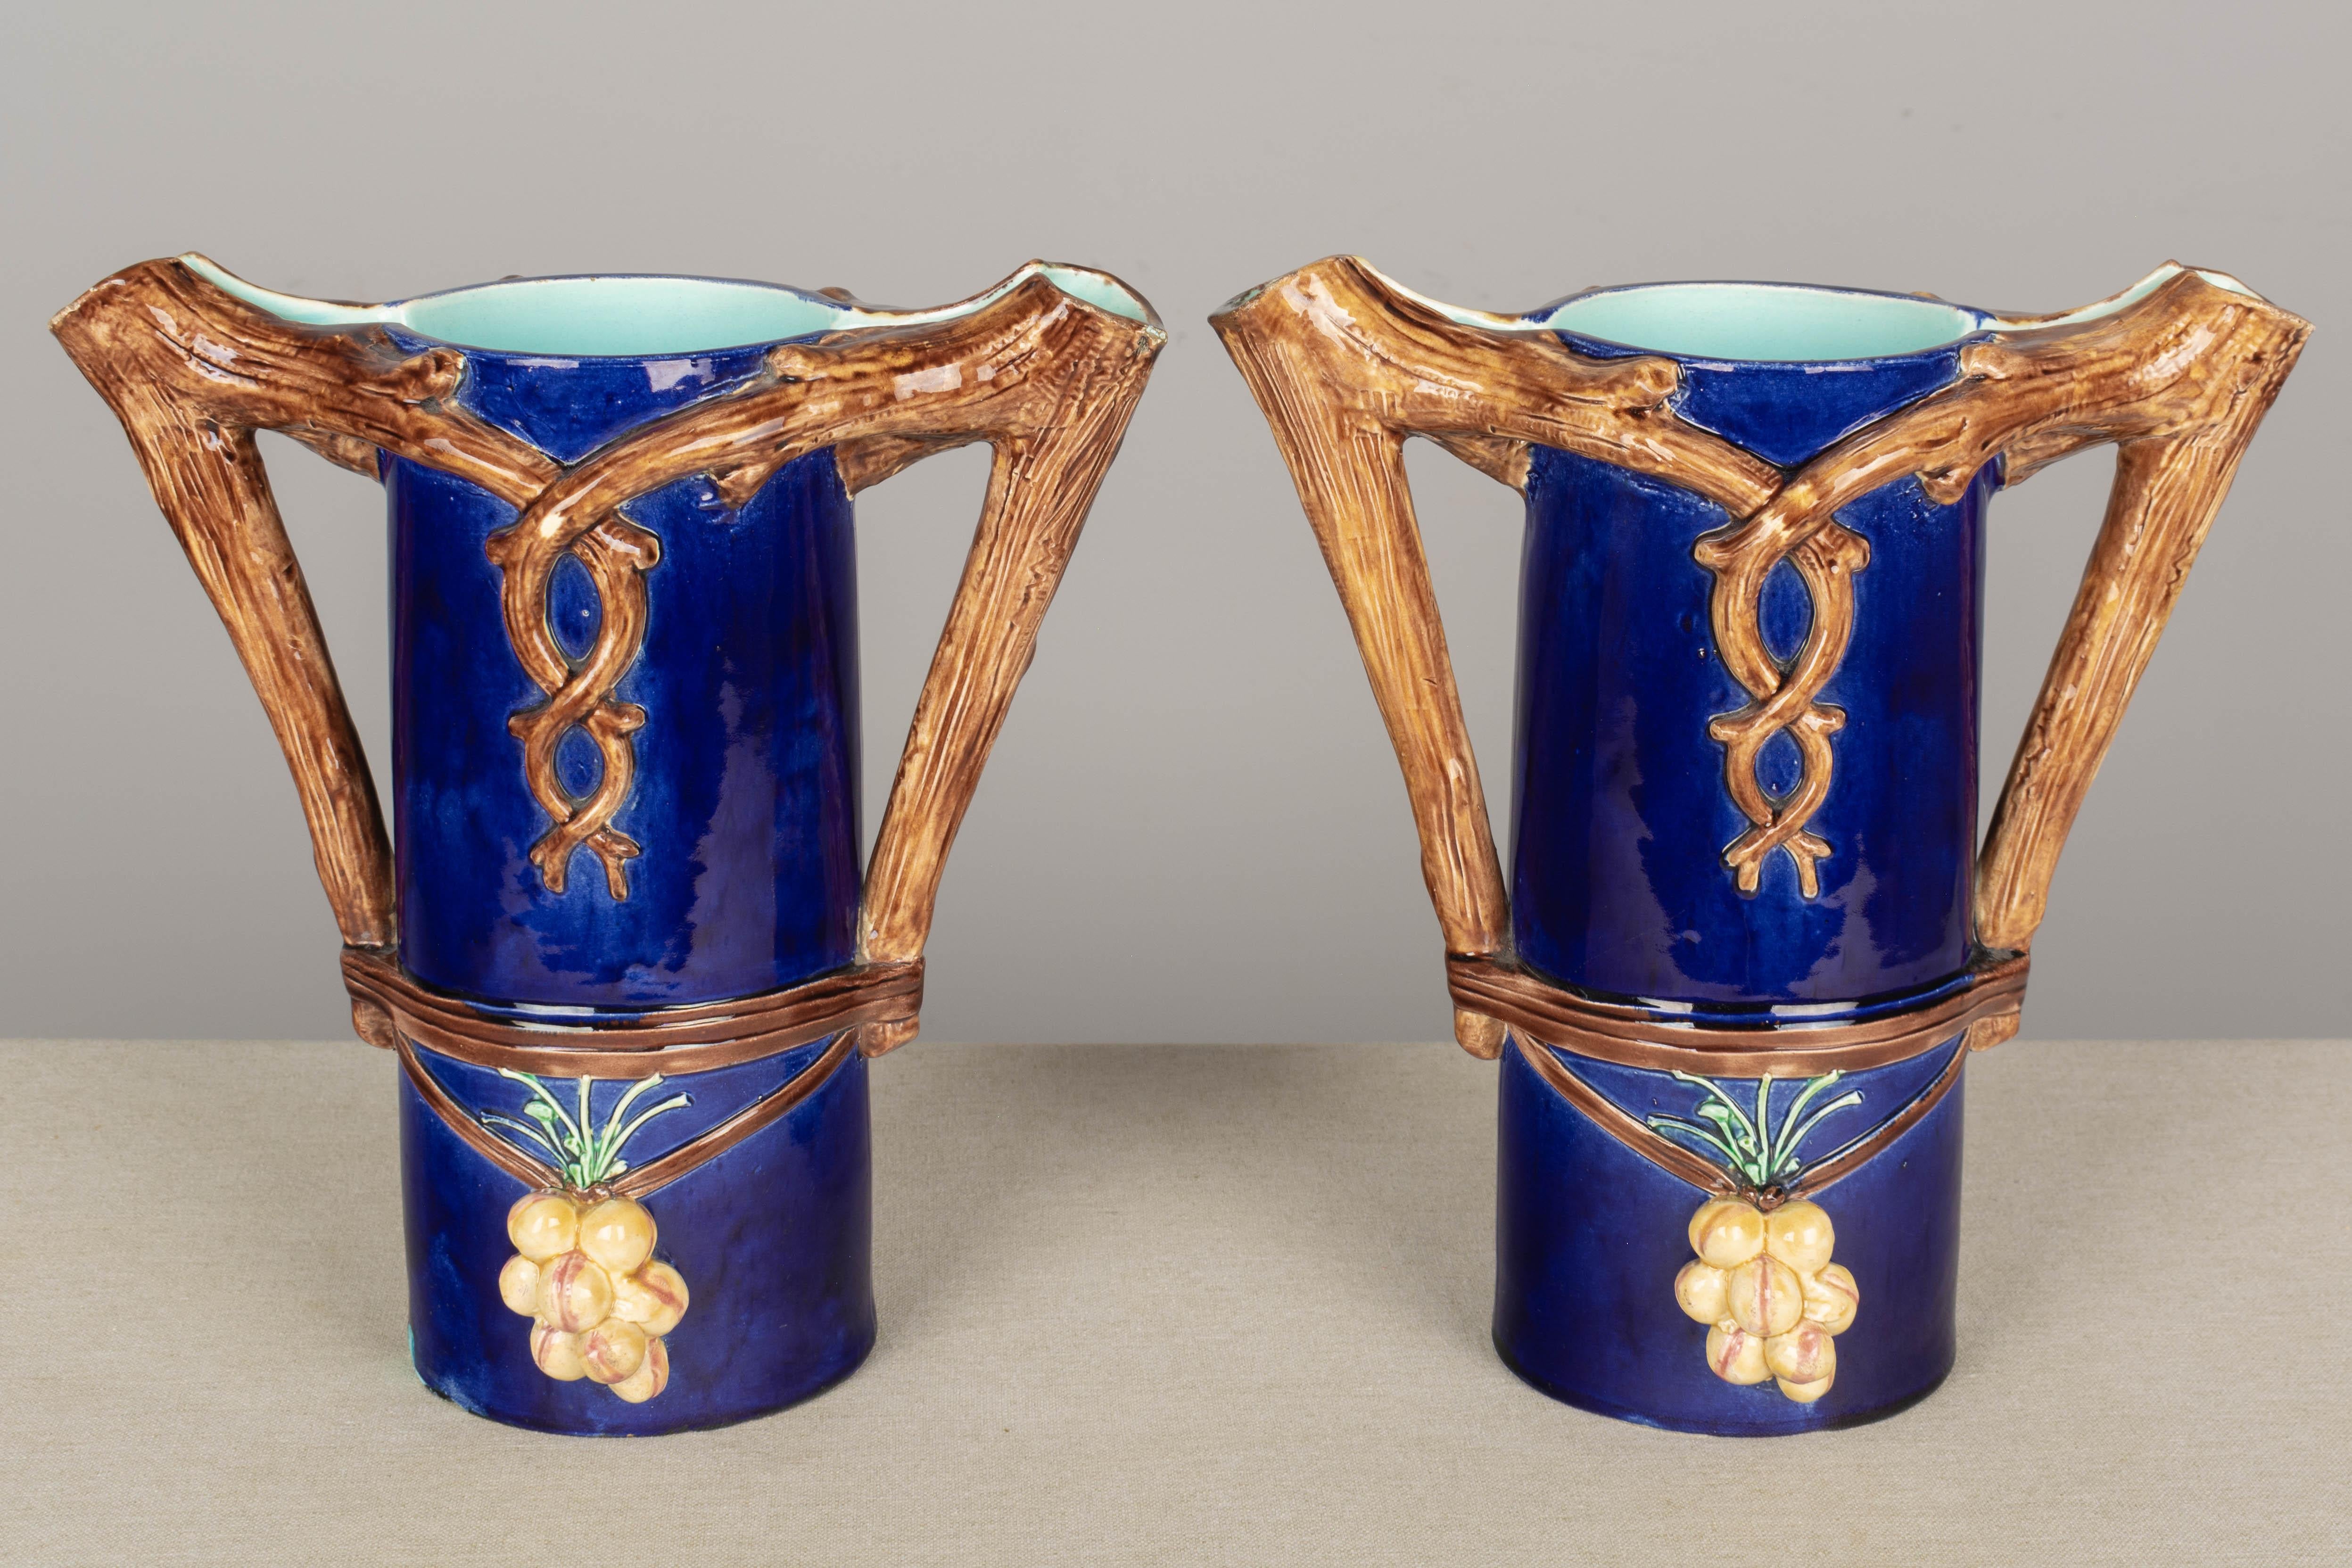 A pair of French Majolica vases or pitchers, each with double tree branch form handles and spouts. Deep, rich cobalt blue glaze with aqua interior and grape clusters. Minor glaze loss.